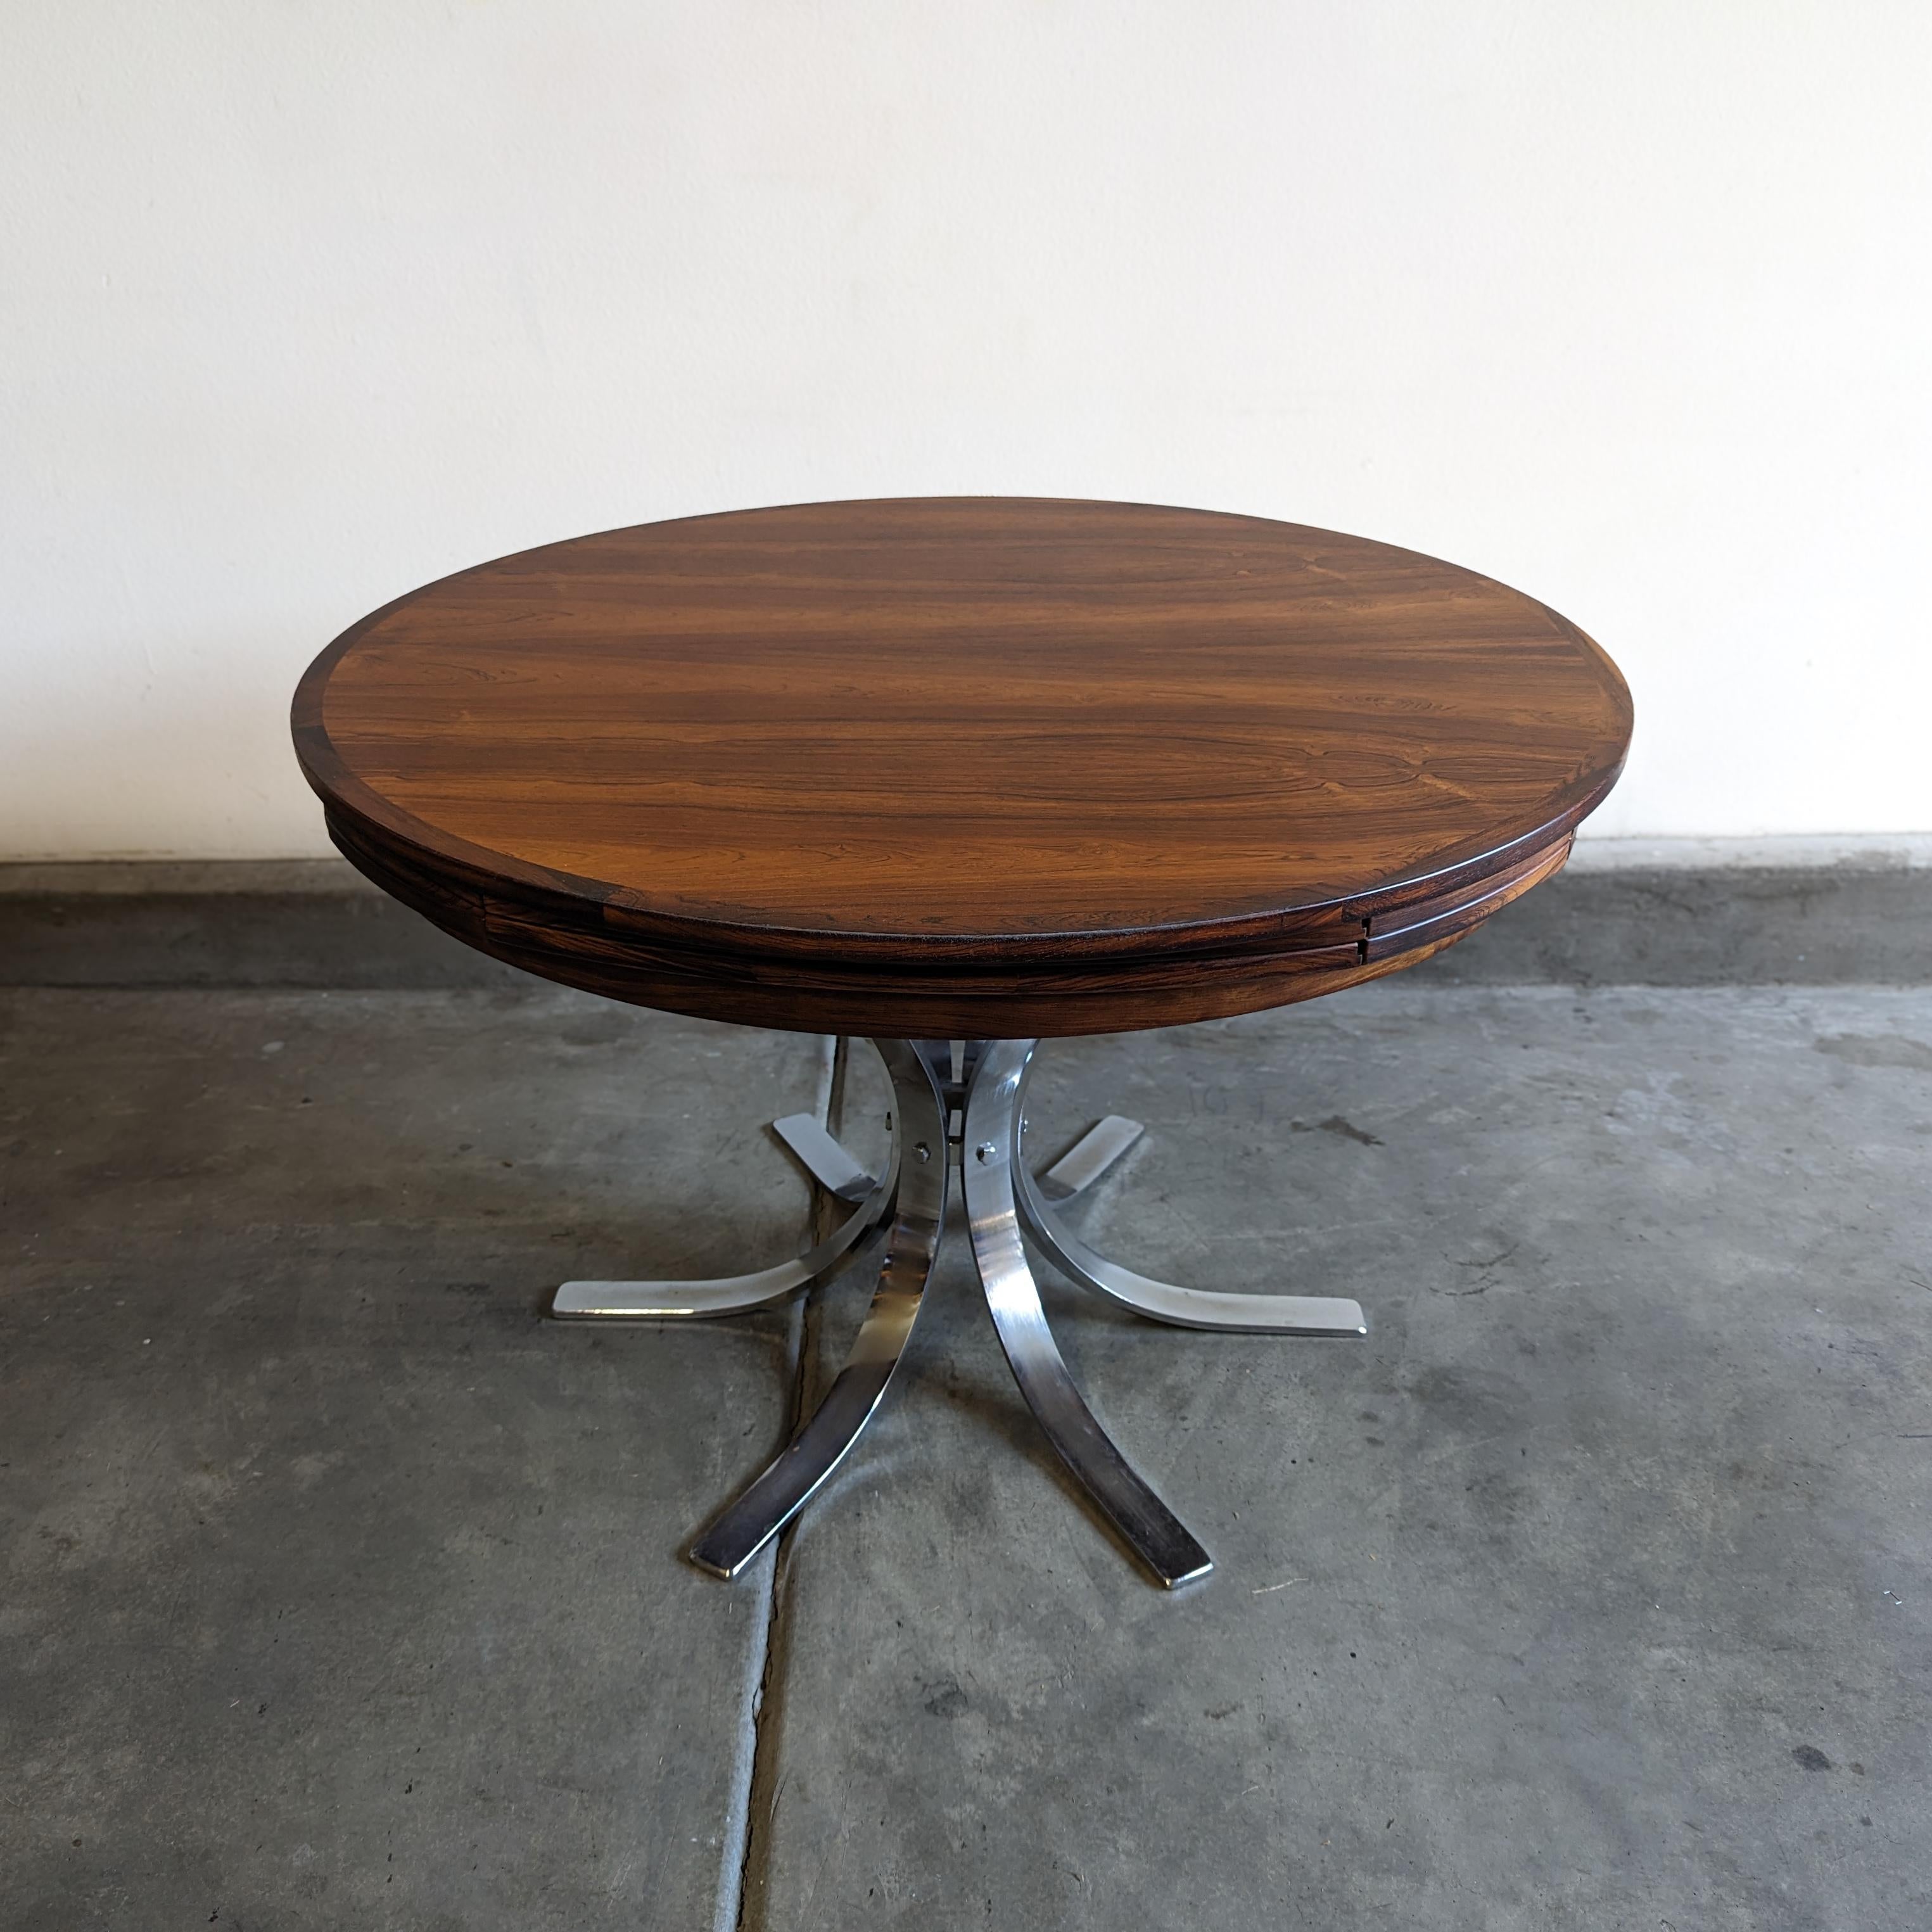 Danish Mid Century Rosewood Flip Flap Circular Dining Table by Dyrlund, c1960s For Sale 7